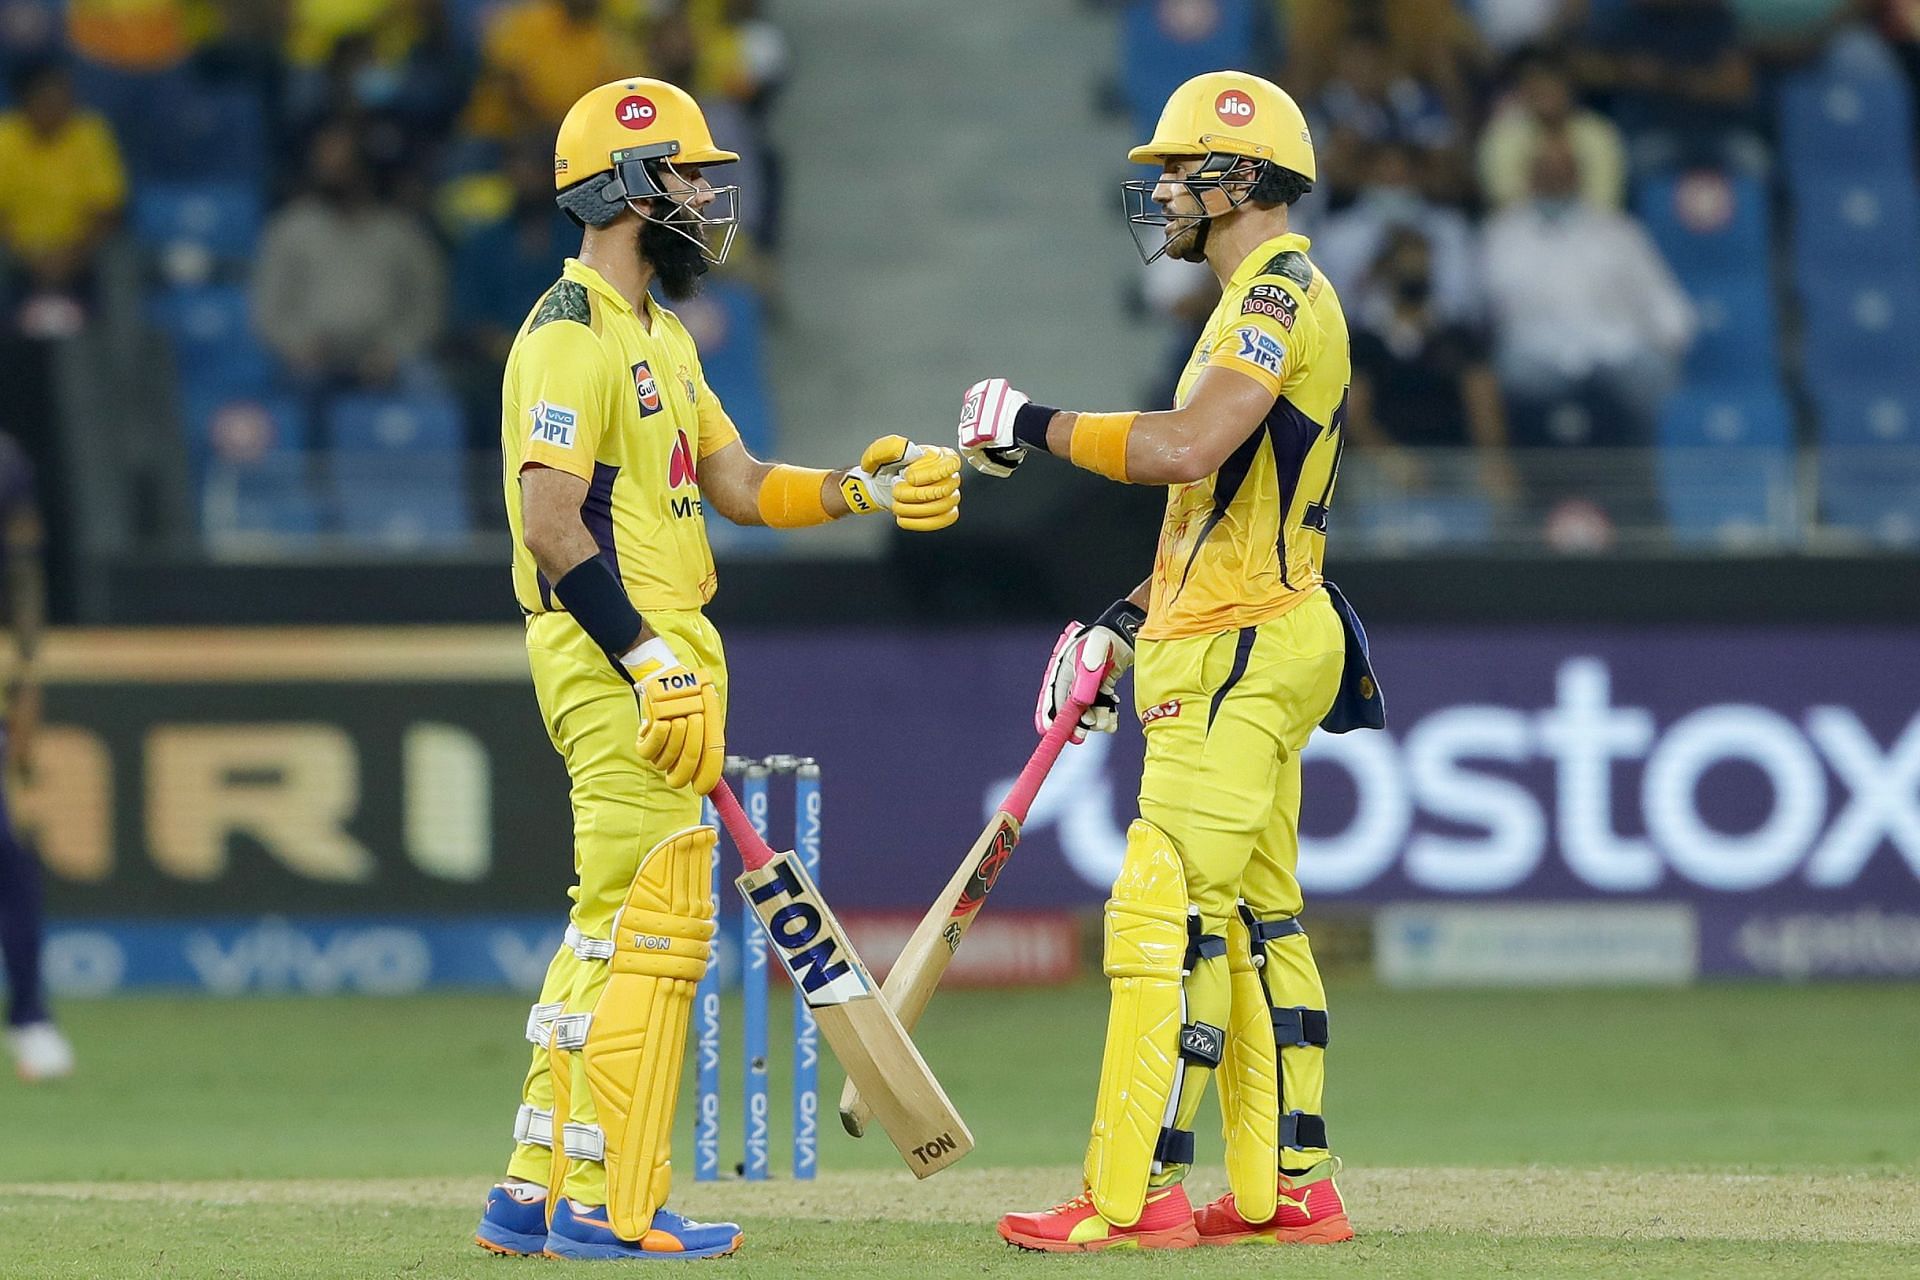 Moeen Ali (L) and Faf du Plessis will play for Cumilla Victorians in the Bangladesh Premier League (Image Courtesy: IPLT20.com)